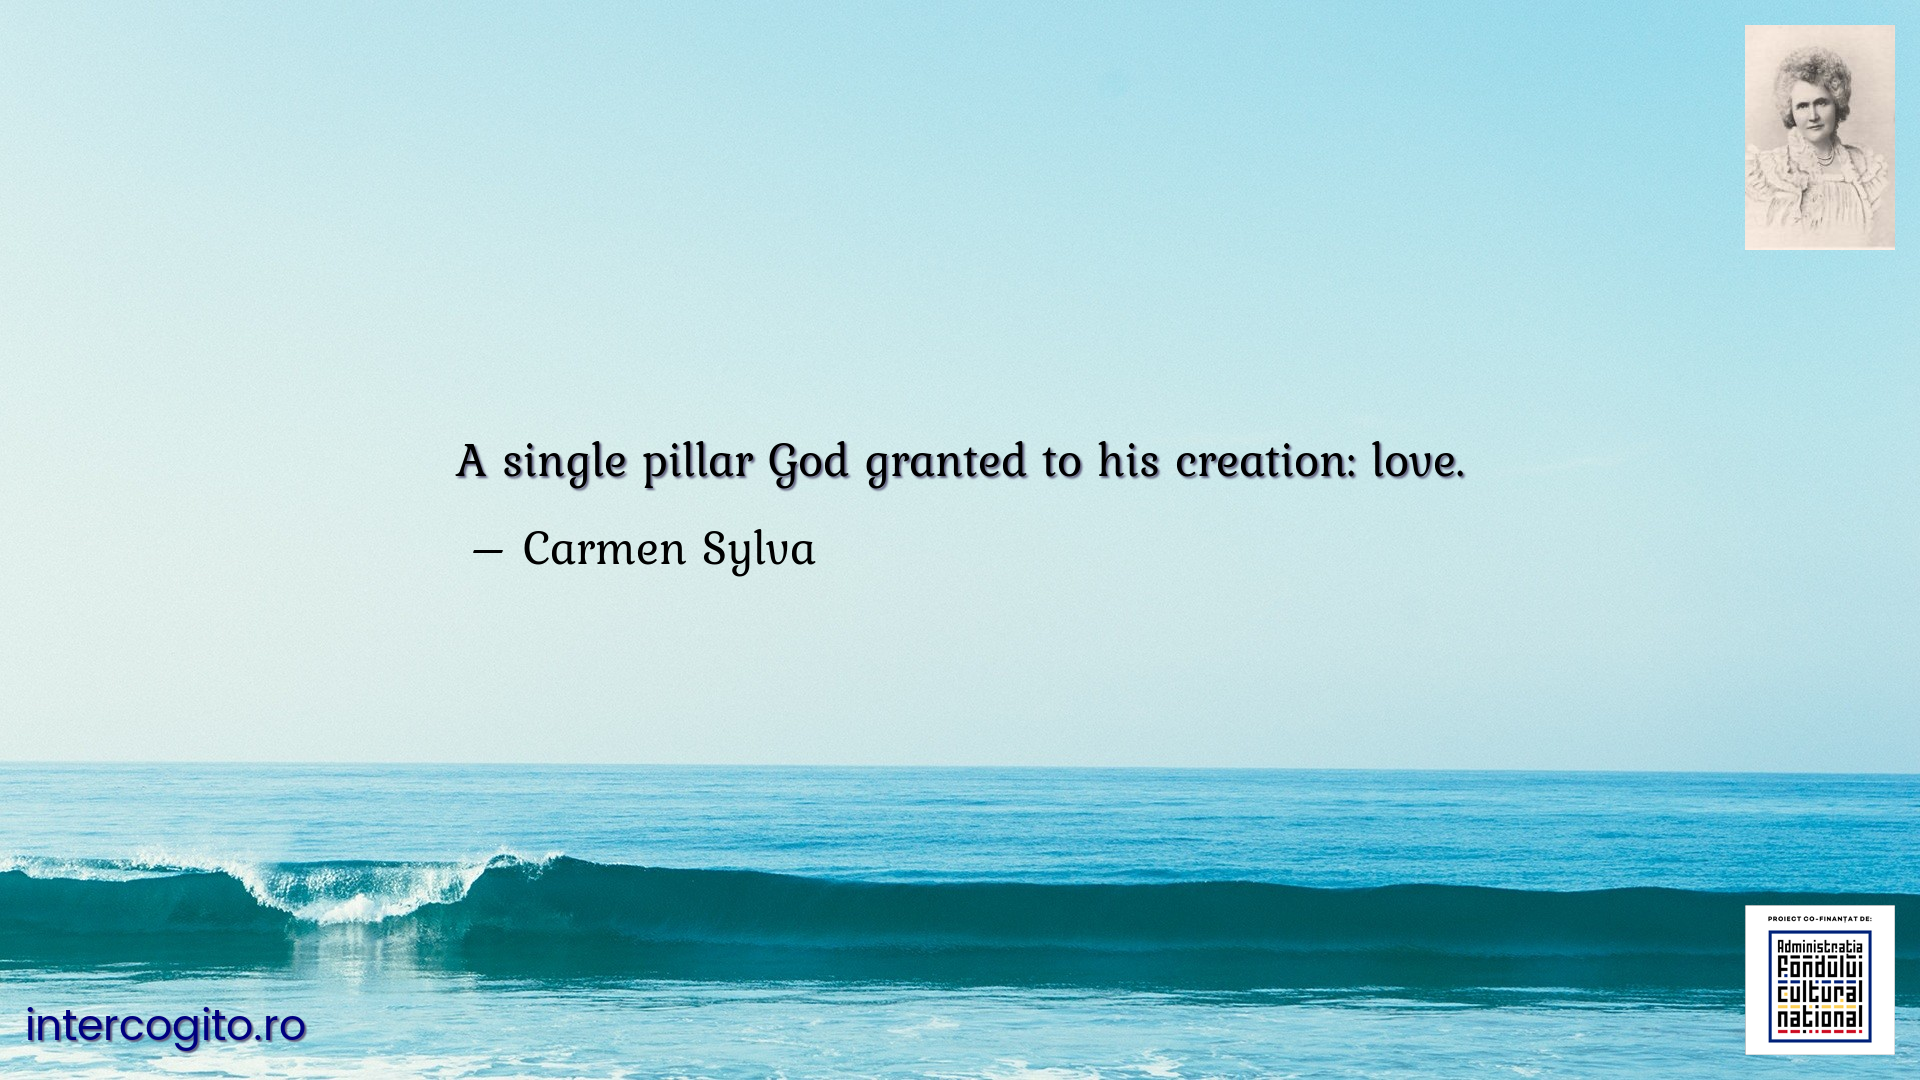 A single pillar God granted to his creation: love.